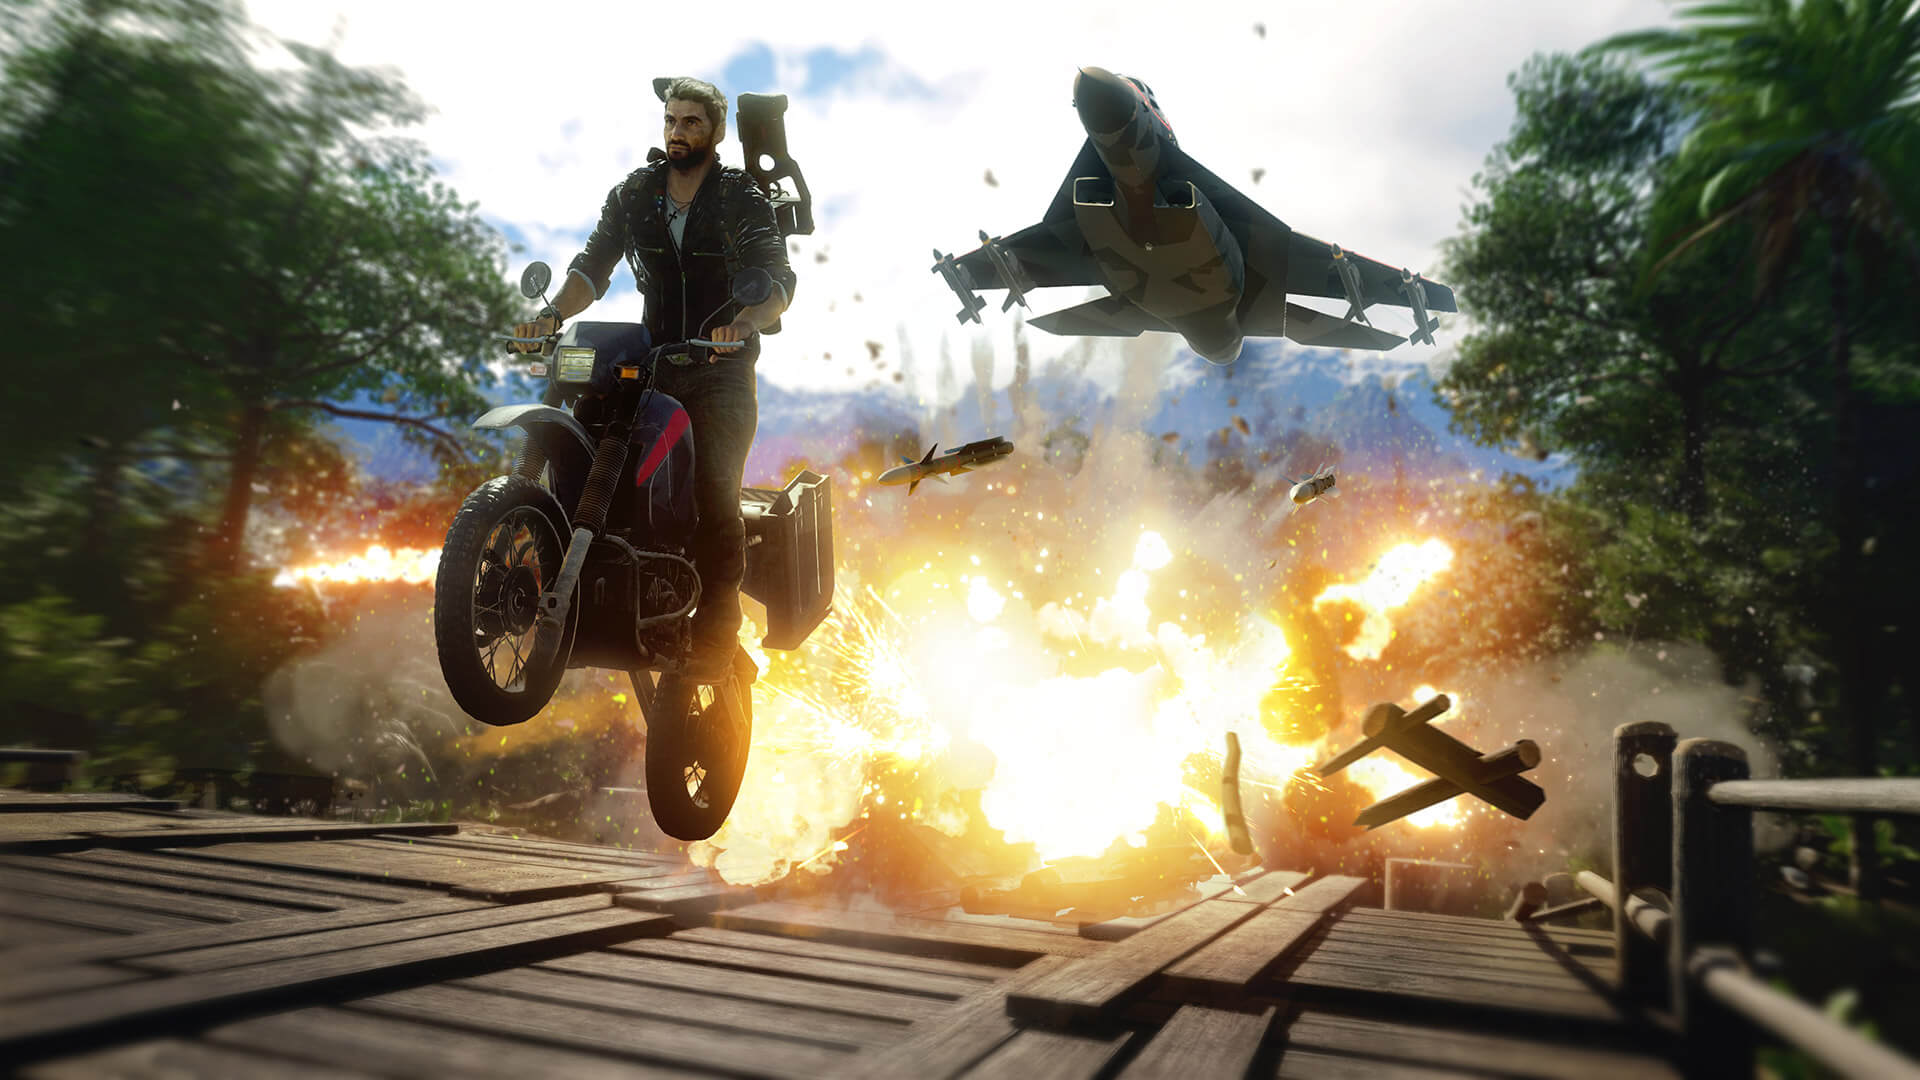 Diesel productv2 just cause 4 standard edition EGS AvalancheStudios JustCause4StandardEdition G1A 01 1920x1080 272509456b8bb0b994a1d6b306cb9877288d3cc0